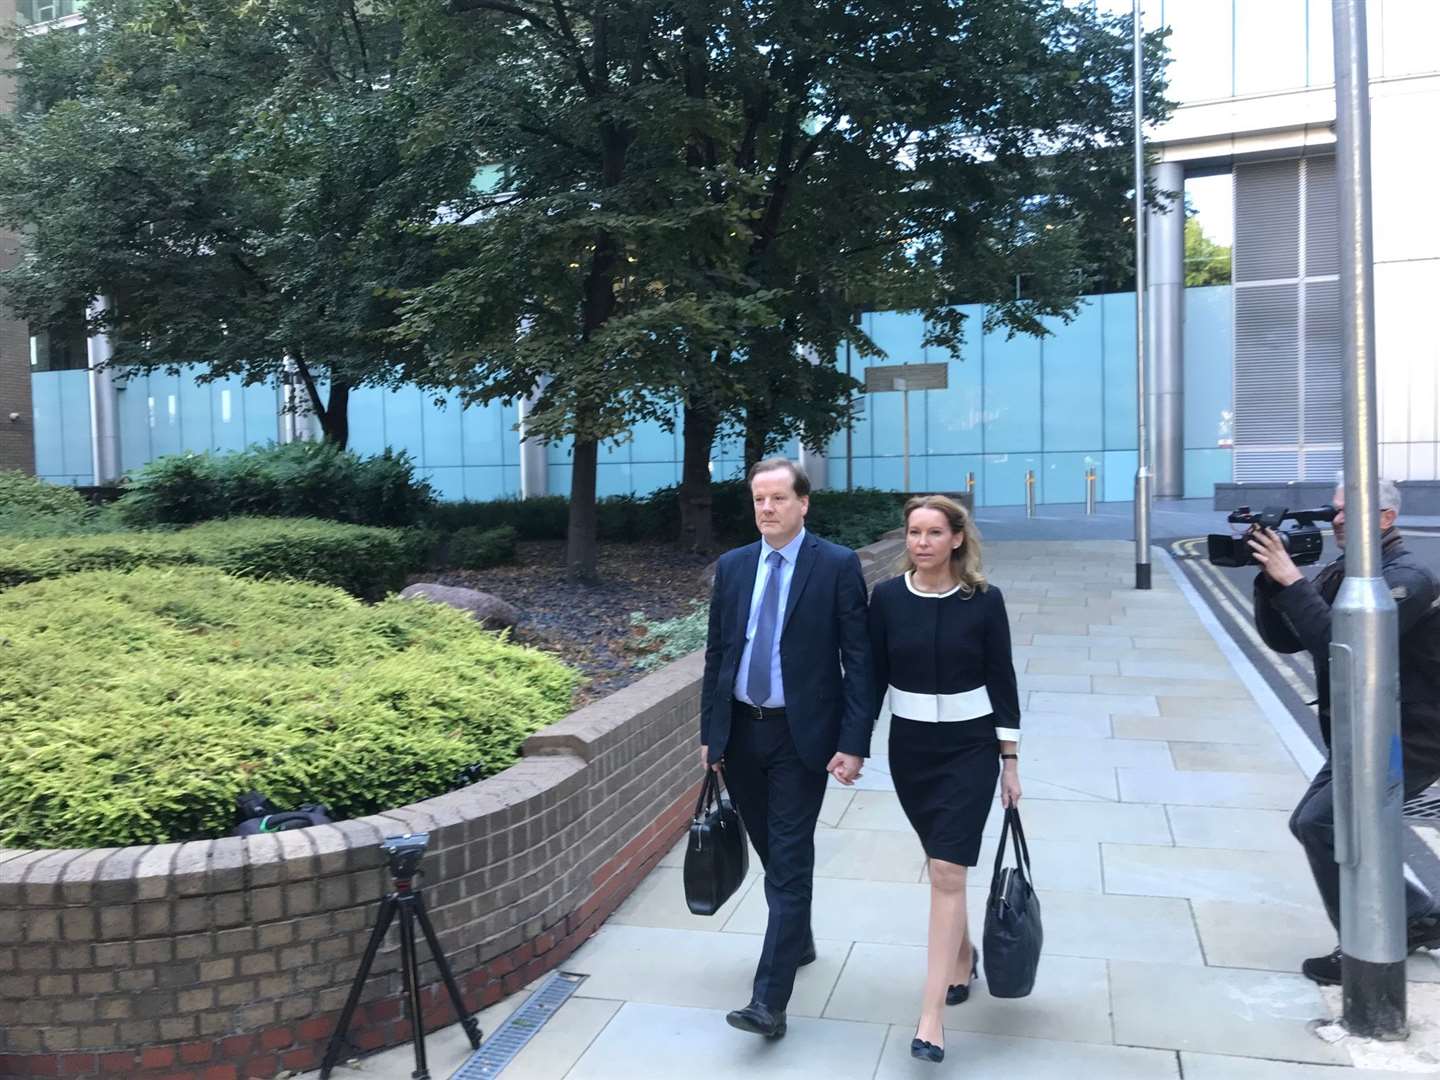 Mr Elphicke and his wife, now Deal and Dover MP Natalie Elphicke, arrive at Southwark Crown Court during his trial